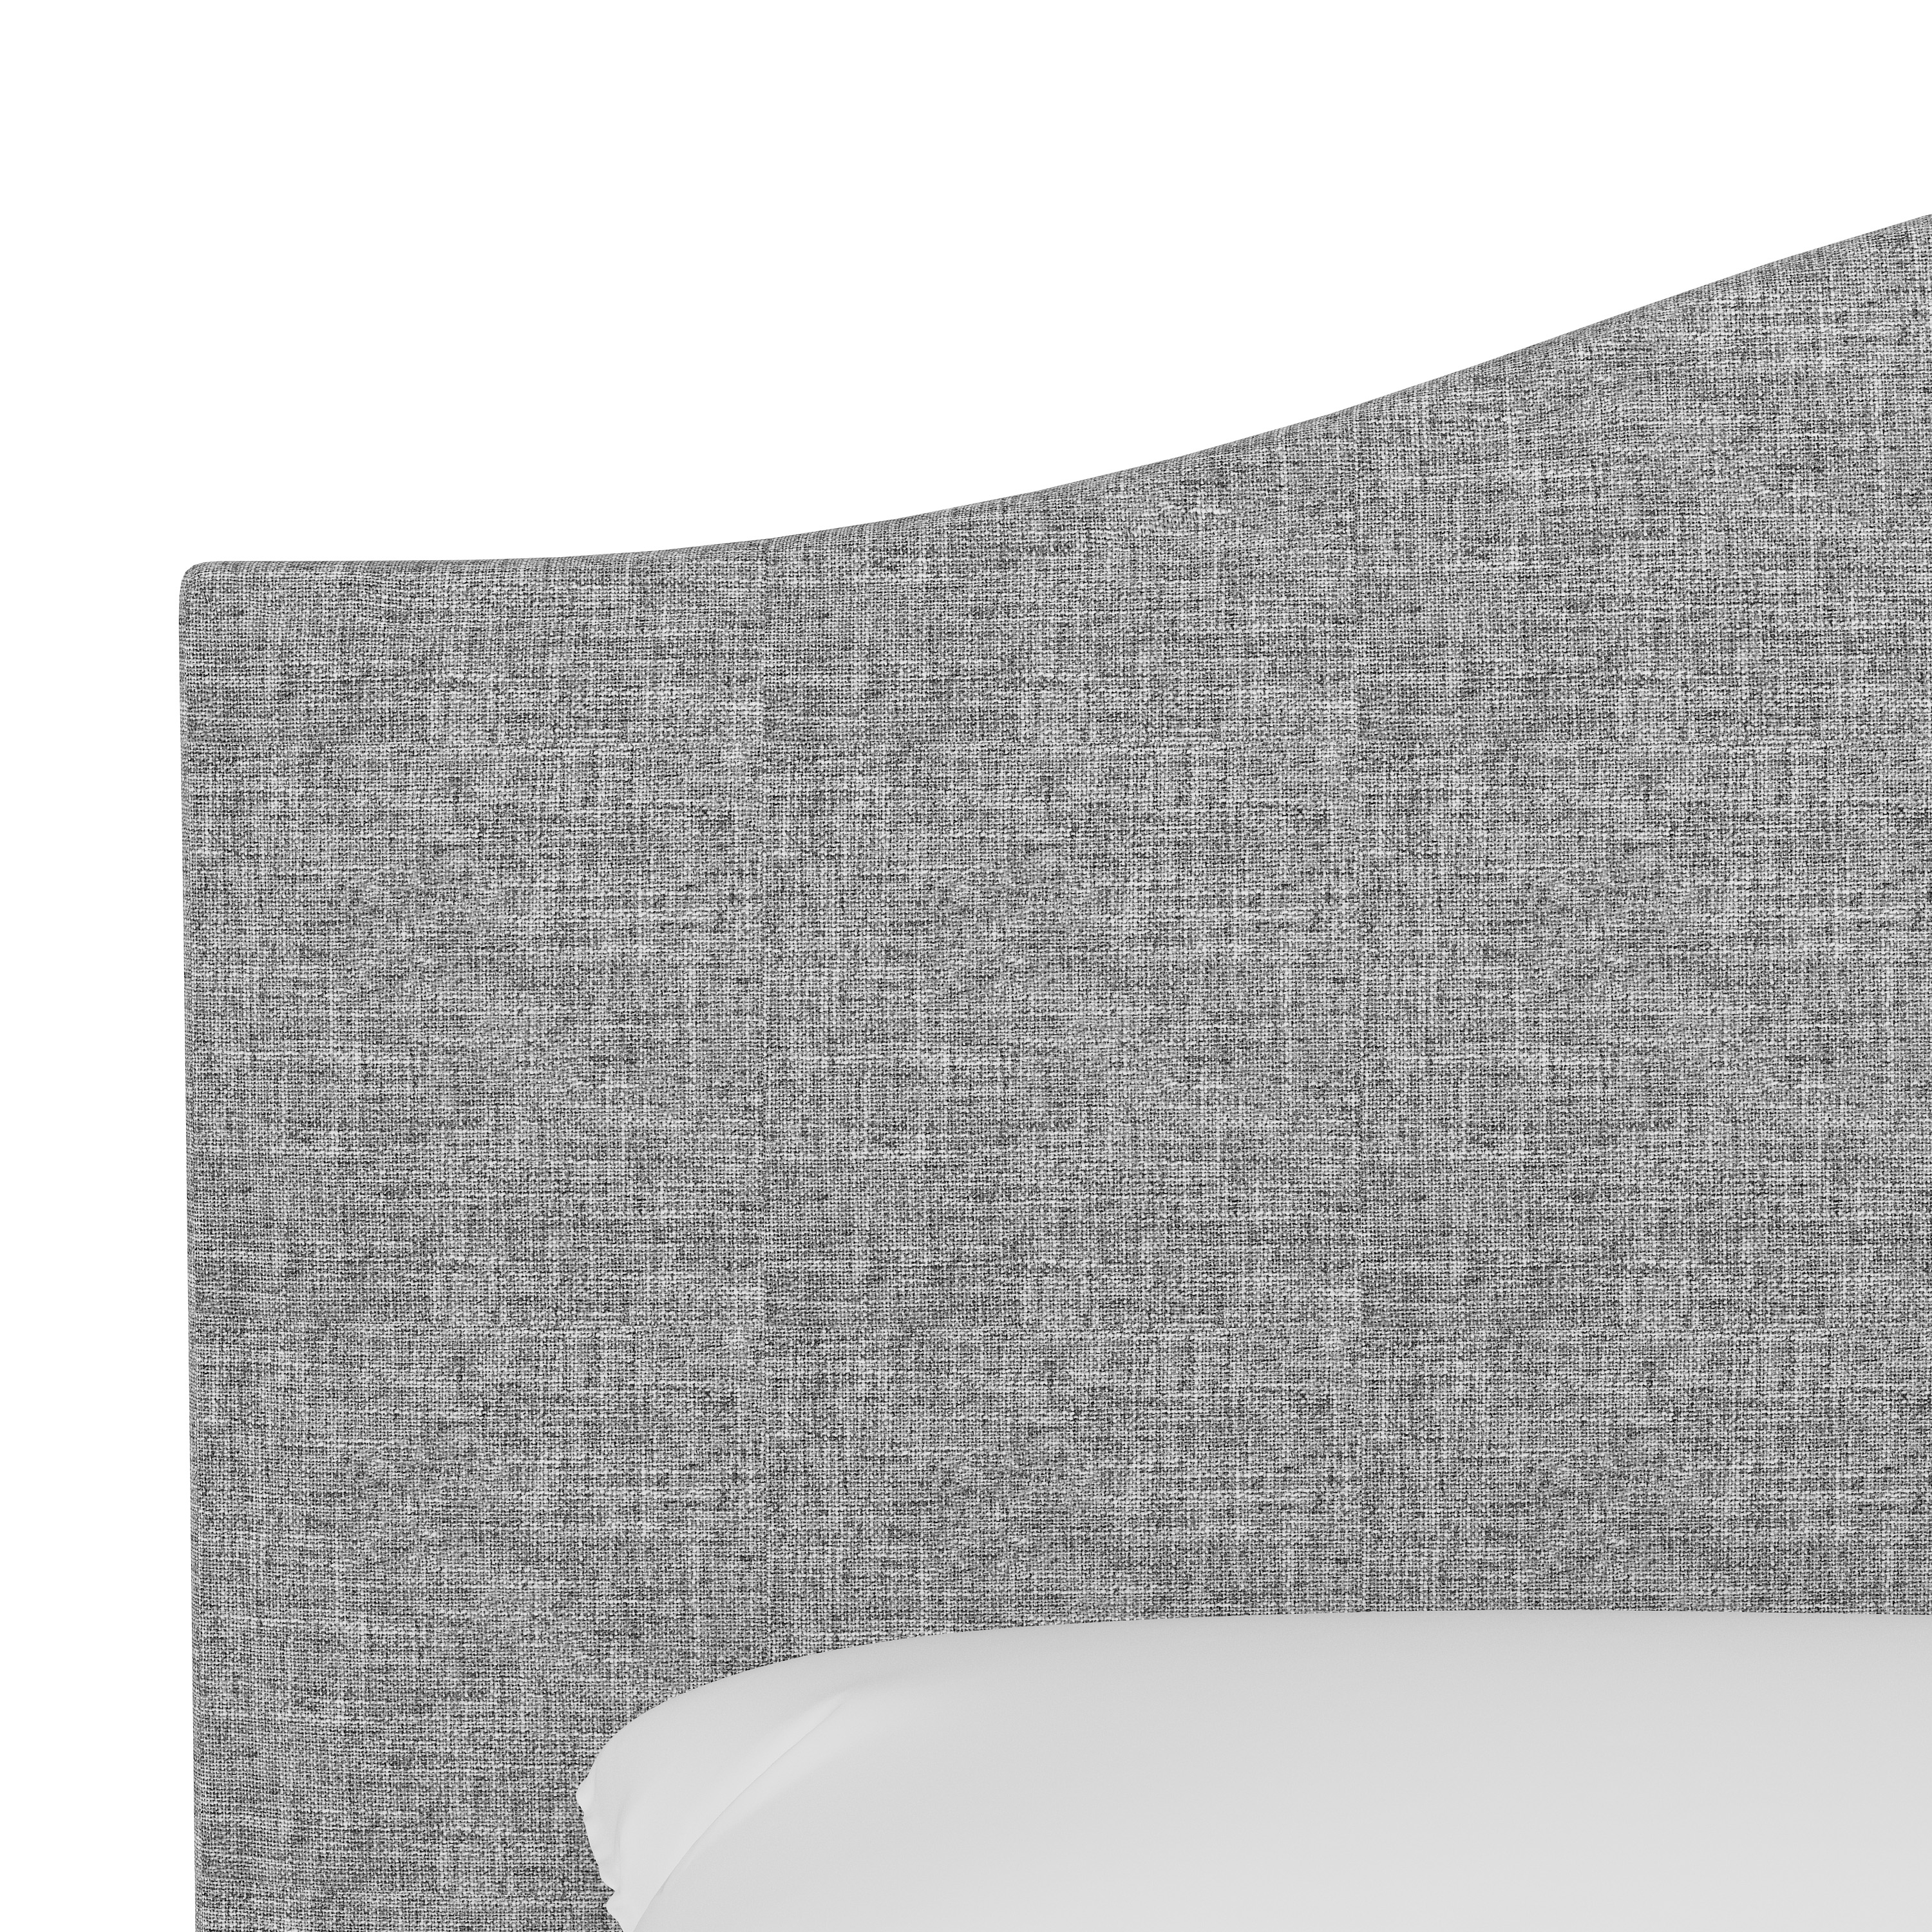 King Kenmore Bed in Zuma Pumice - Image 3